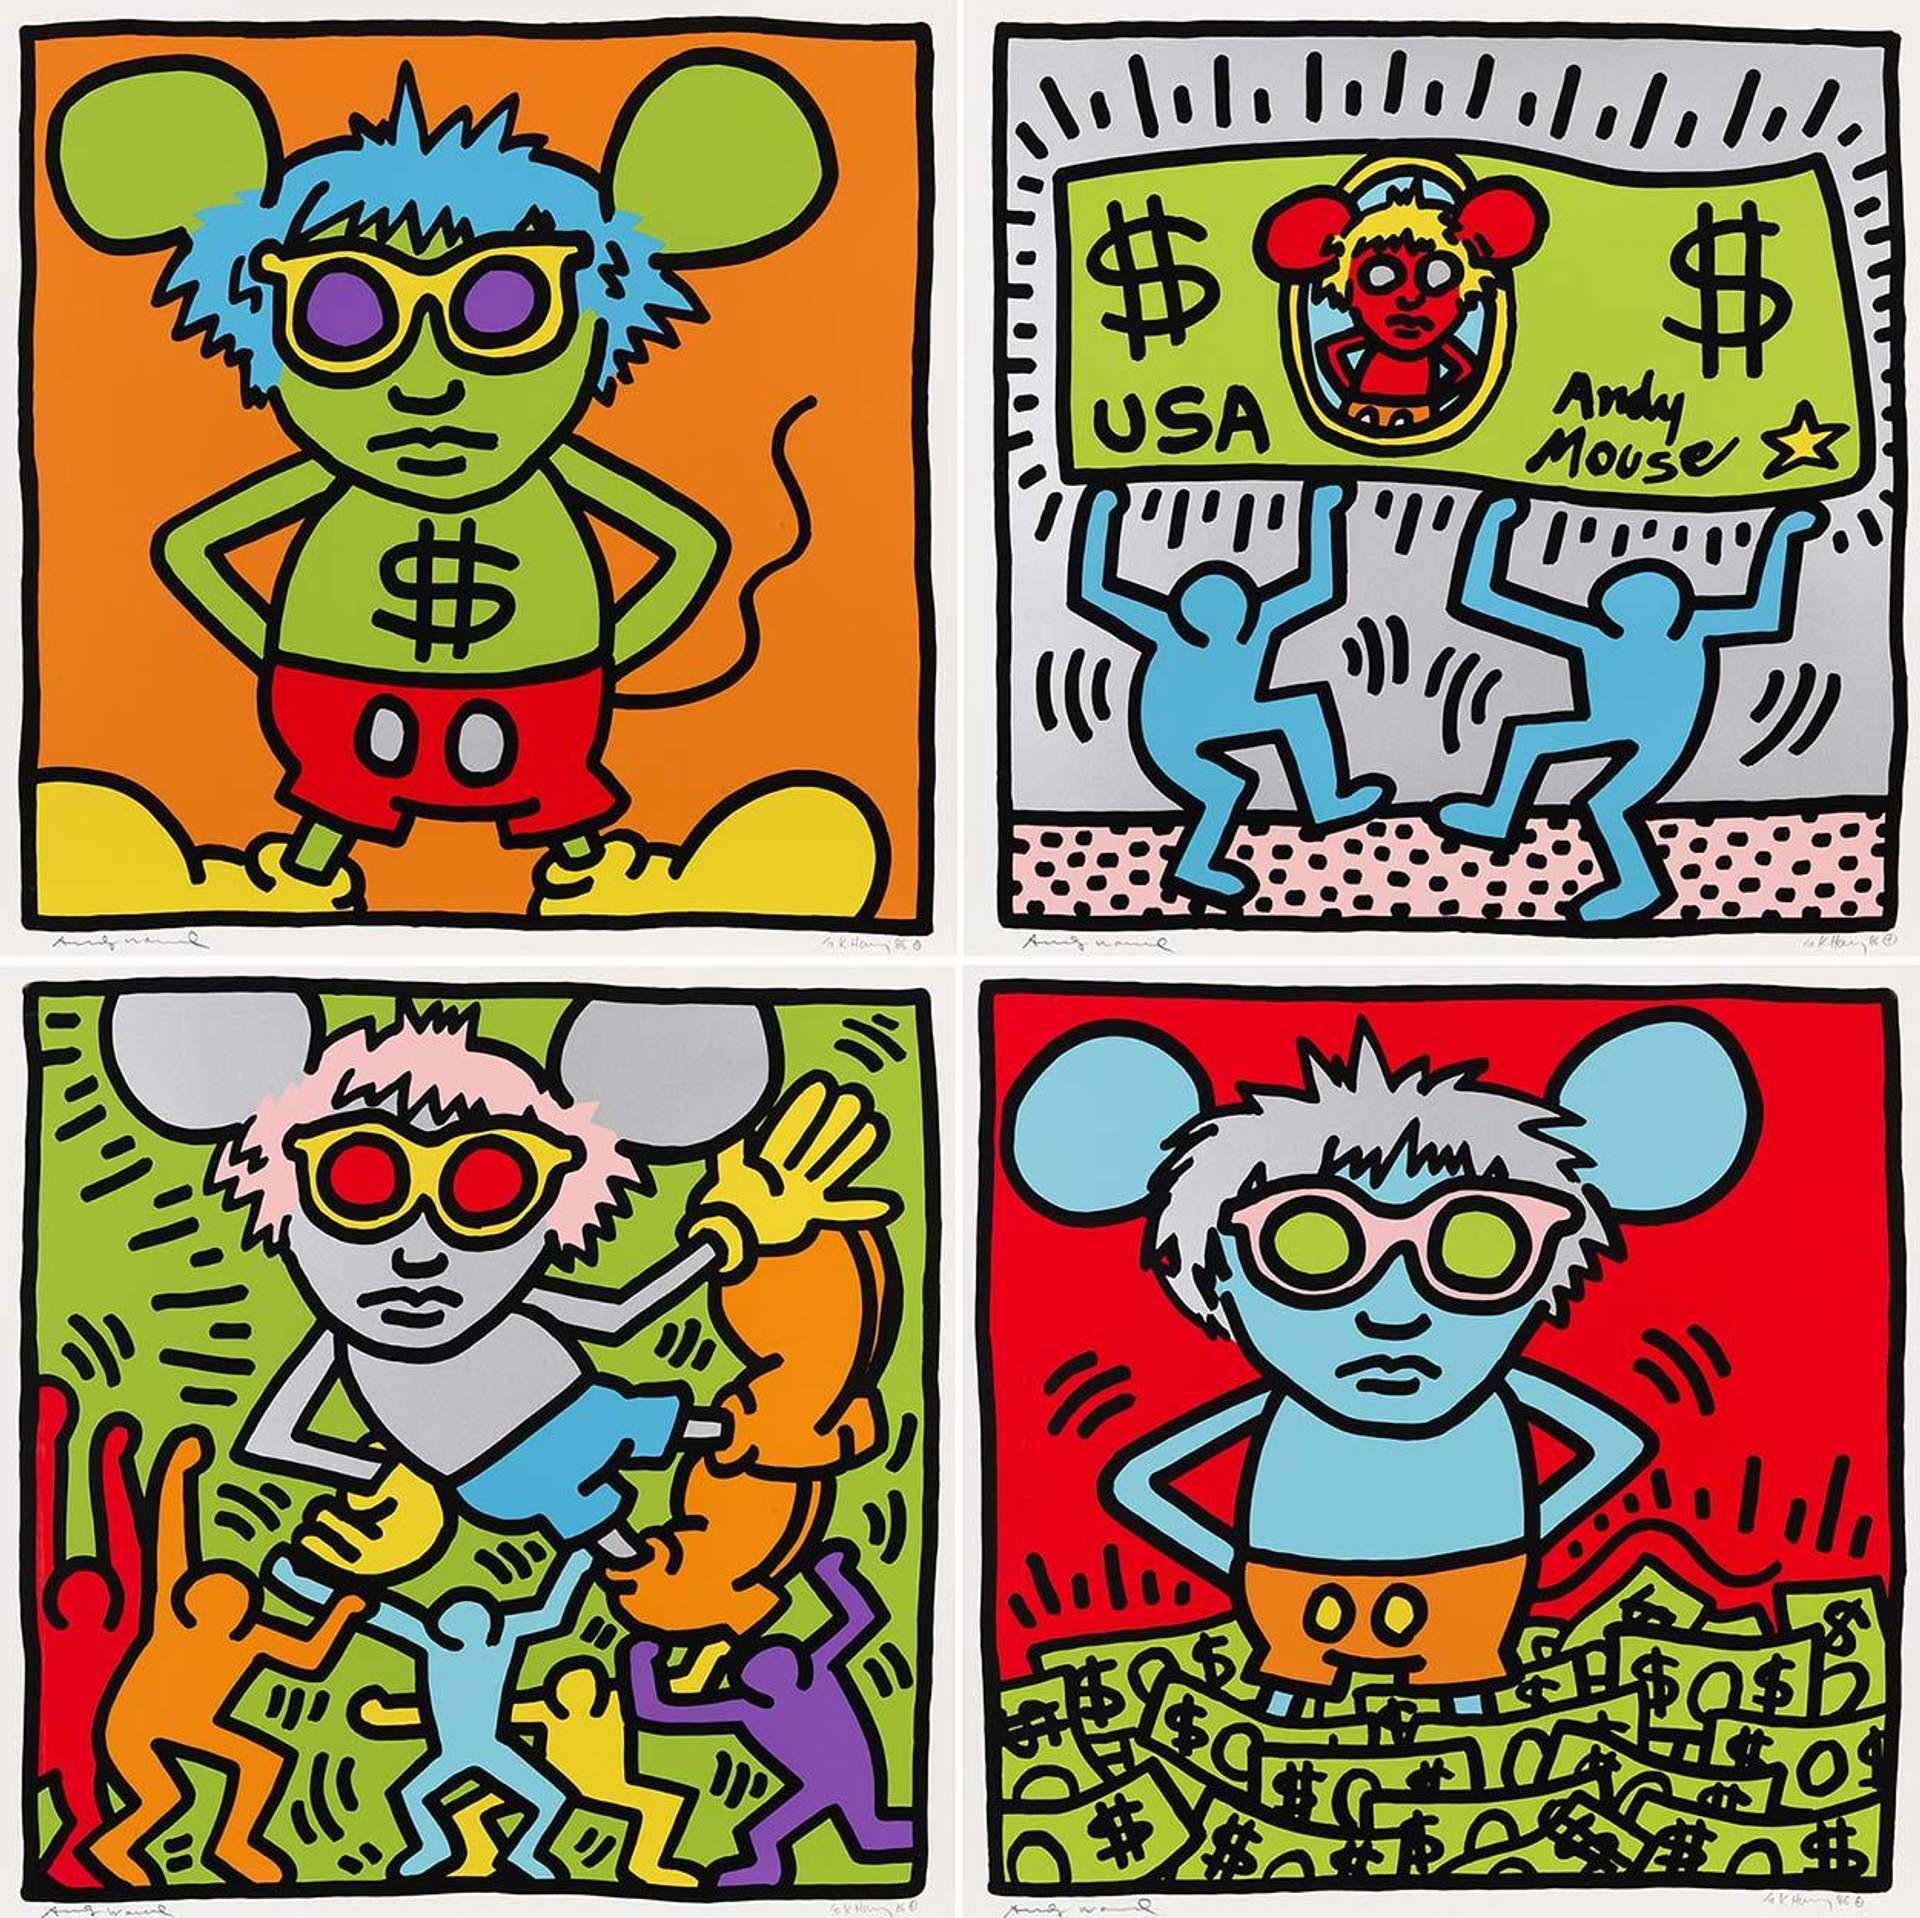 Keith Haring’s Andy Mouse. A Warhol-styled Keith Haring artwork with four squares featuring a mouse in the likeness of Andy Warhol.